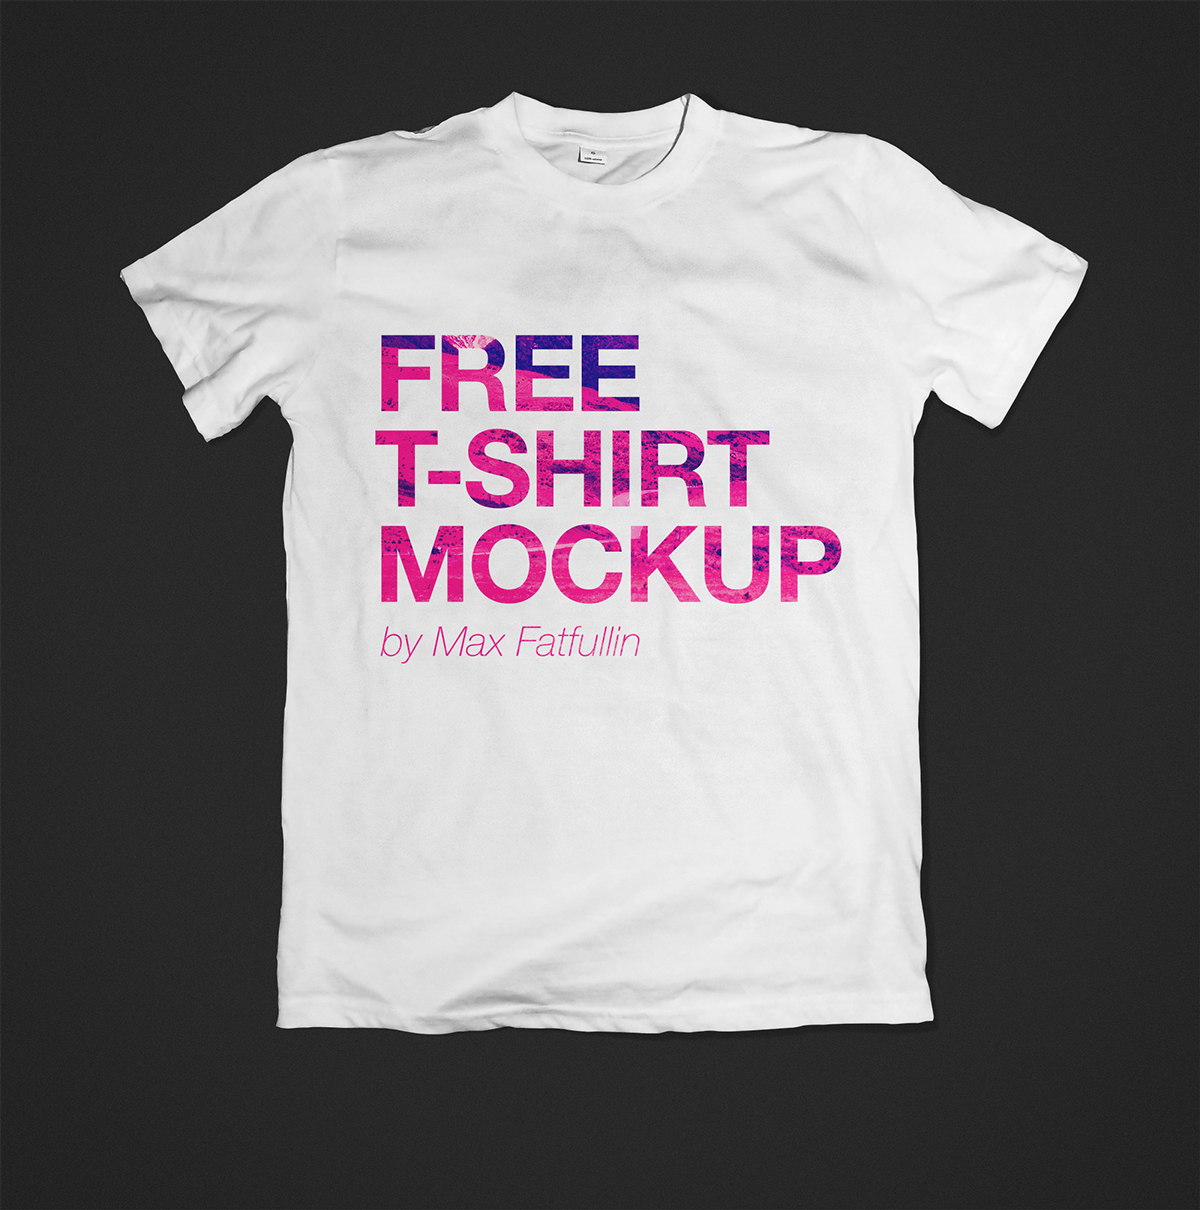 How To Make A T Shirt Mockup In Photoshop